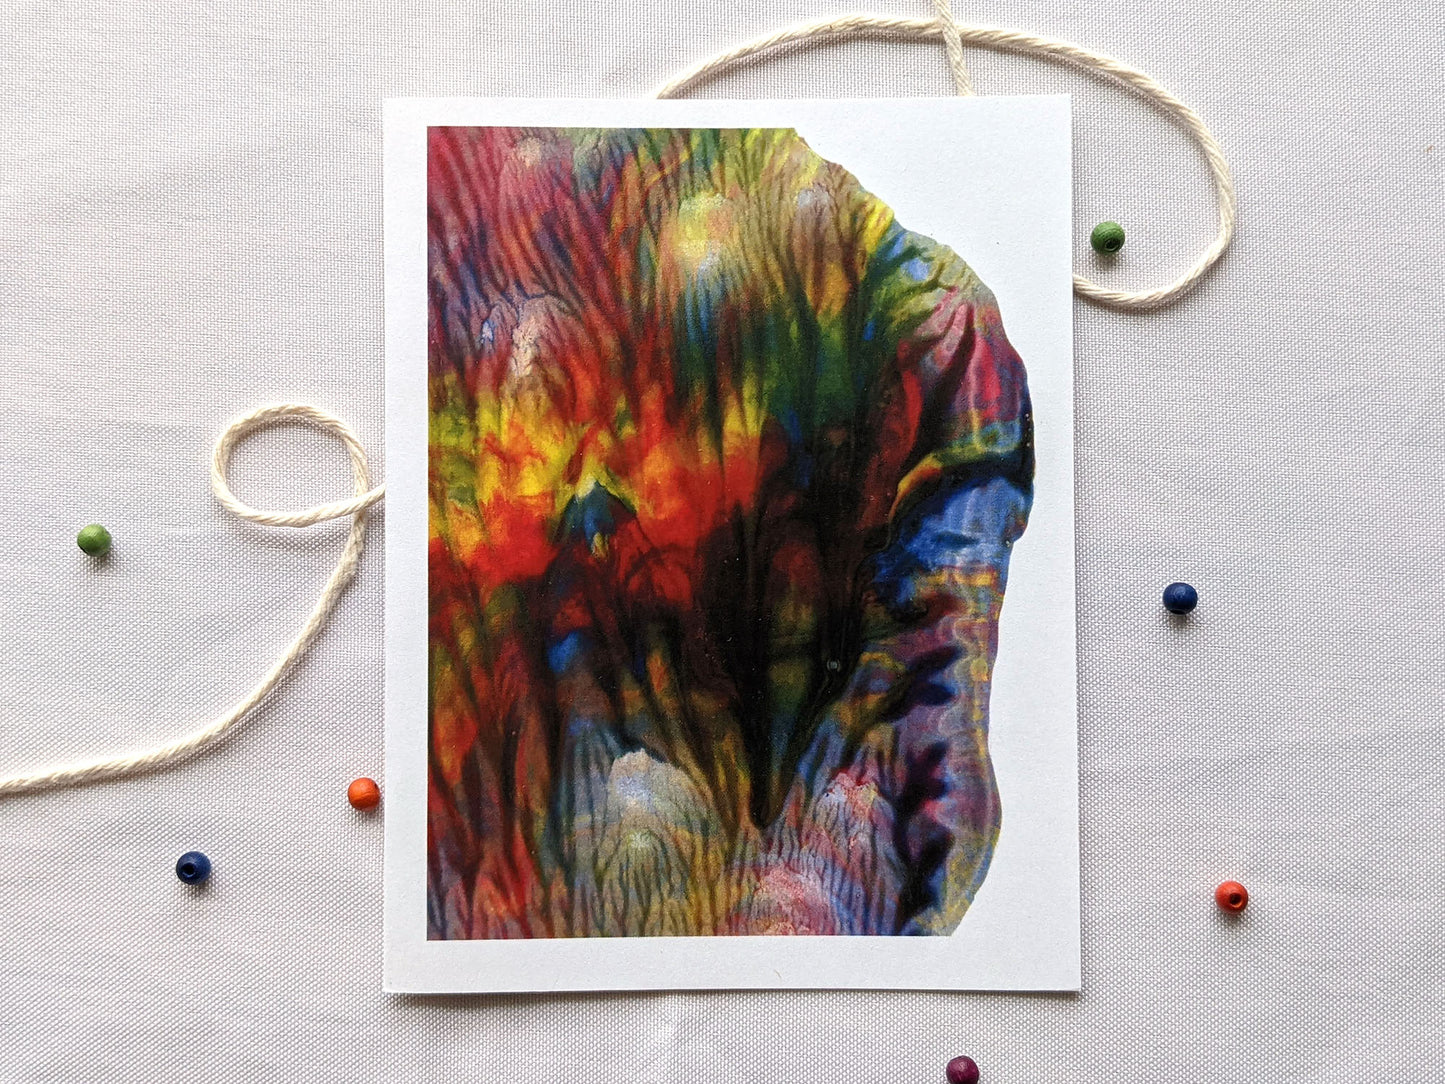 A greeting card with rainbow colored abstract art sits on a white cloth background with cooking twine and small colorful wooden beads.